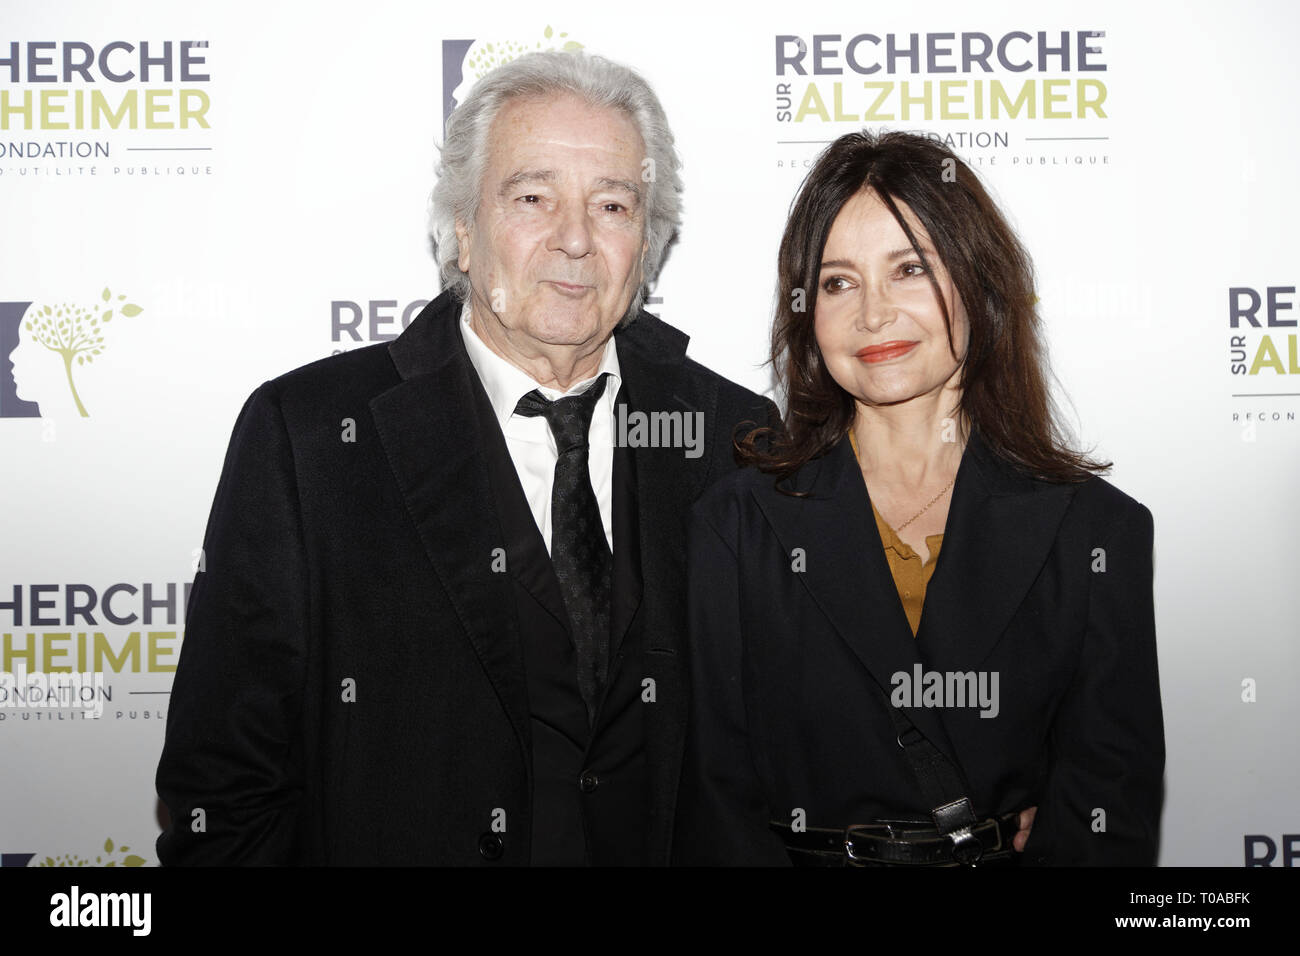 Paris, France. 18th Mar 2019. Pierre Arditi and Evelyne Bouix - Photocall of the 14th Gala 2019 of the Association for Alzheimer Research at the Olympia in Paris on March 18, 2019 Credit: Véronique PHITOUSSI/Alamy Live News Stock Photo